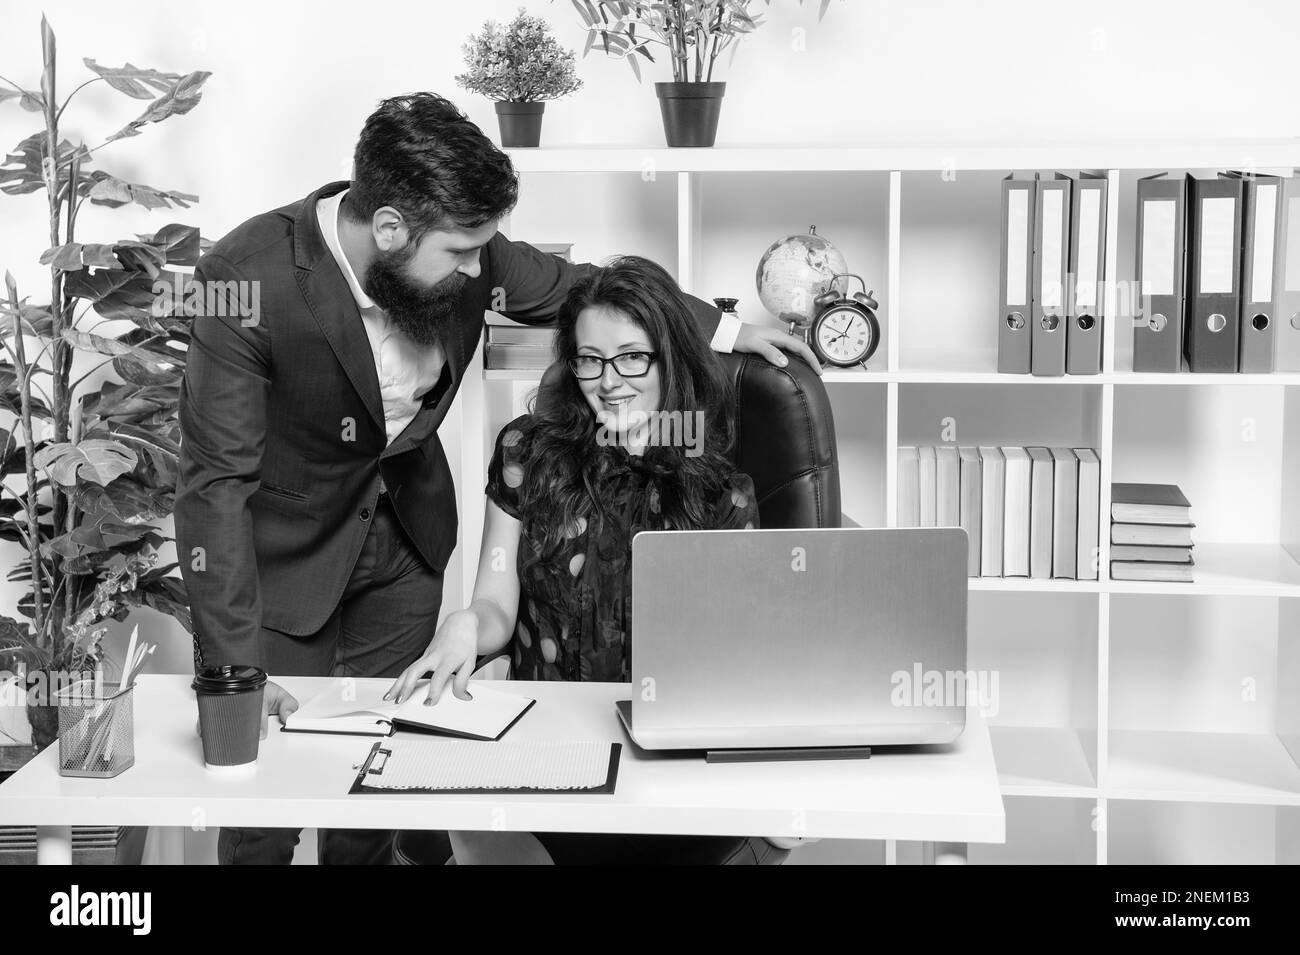 Good colleagues. Male and female colleagues work together. Co-workers in office. Office employees Stock Photo